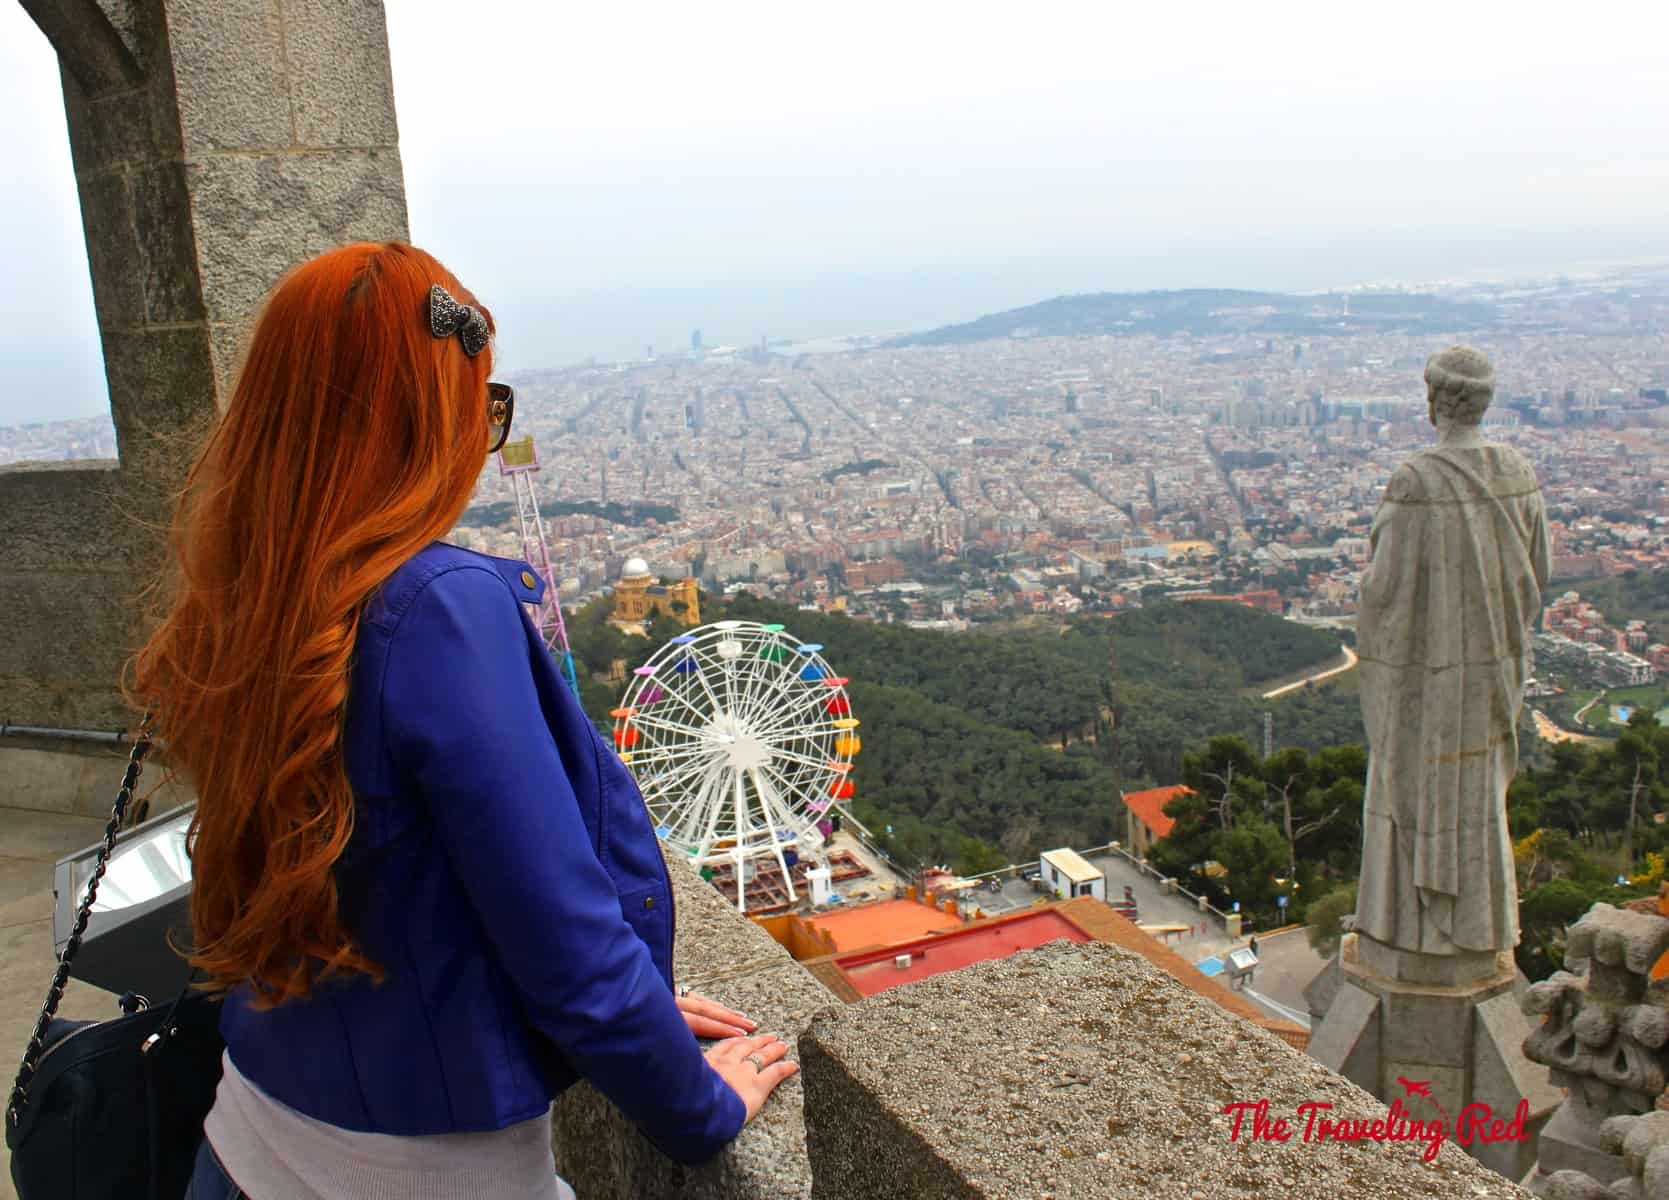 The view of the amusement park in Tibidabo overlooking Barcelona, Spain from the Sagrat Cor (the church at the summit). Tibidabo is a mountain with an amusement park and church. It is the highest point in the city with incredible sweeping views of the city.